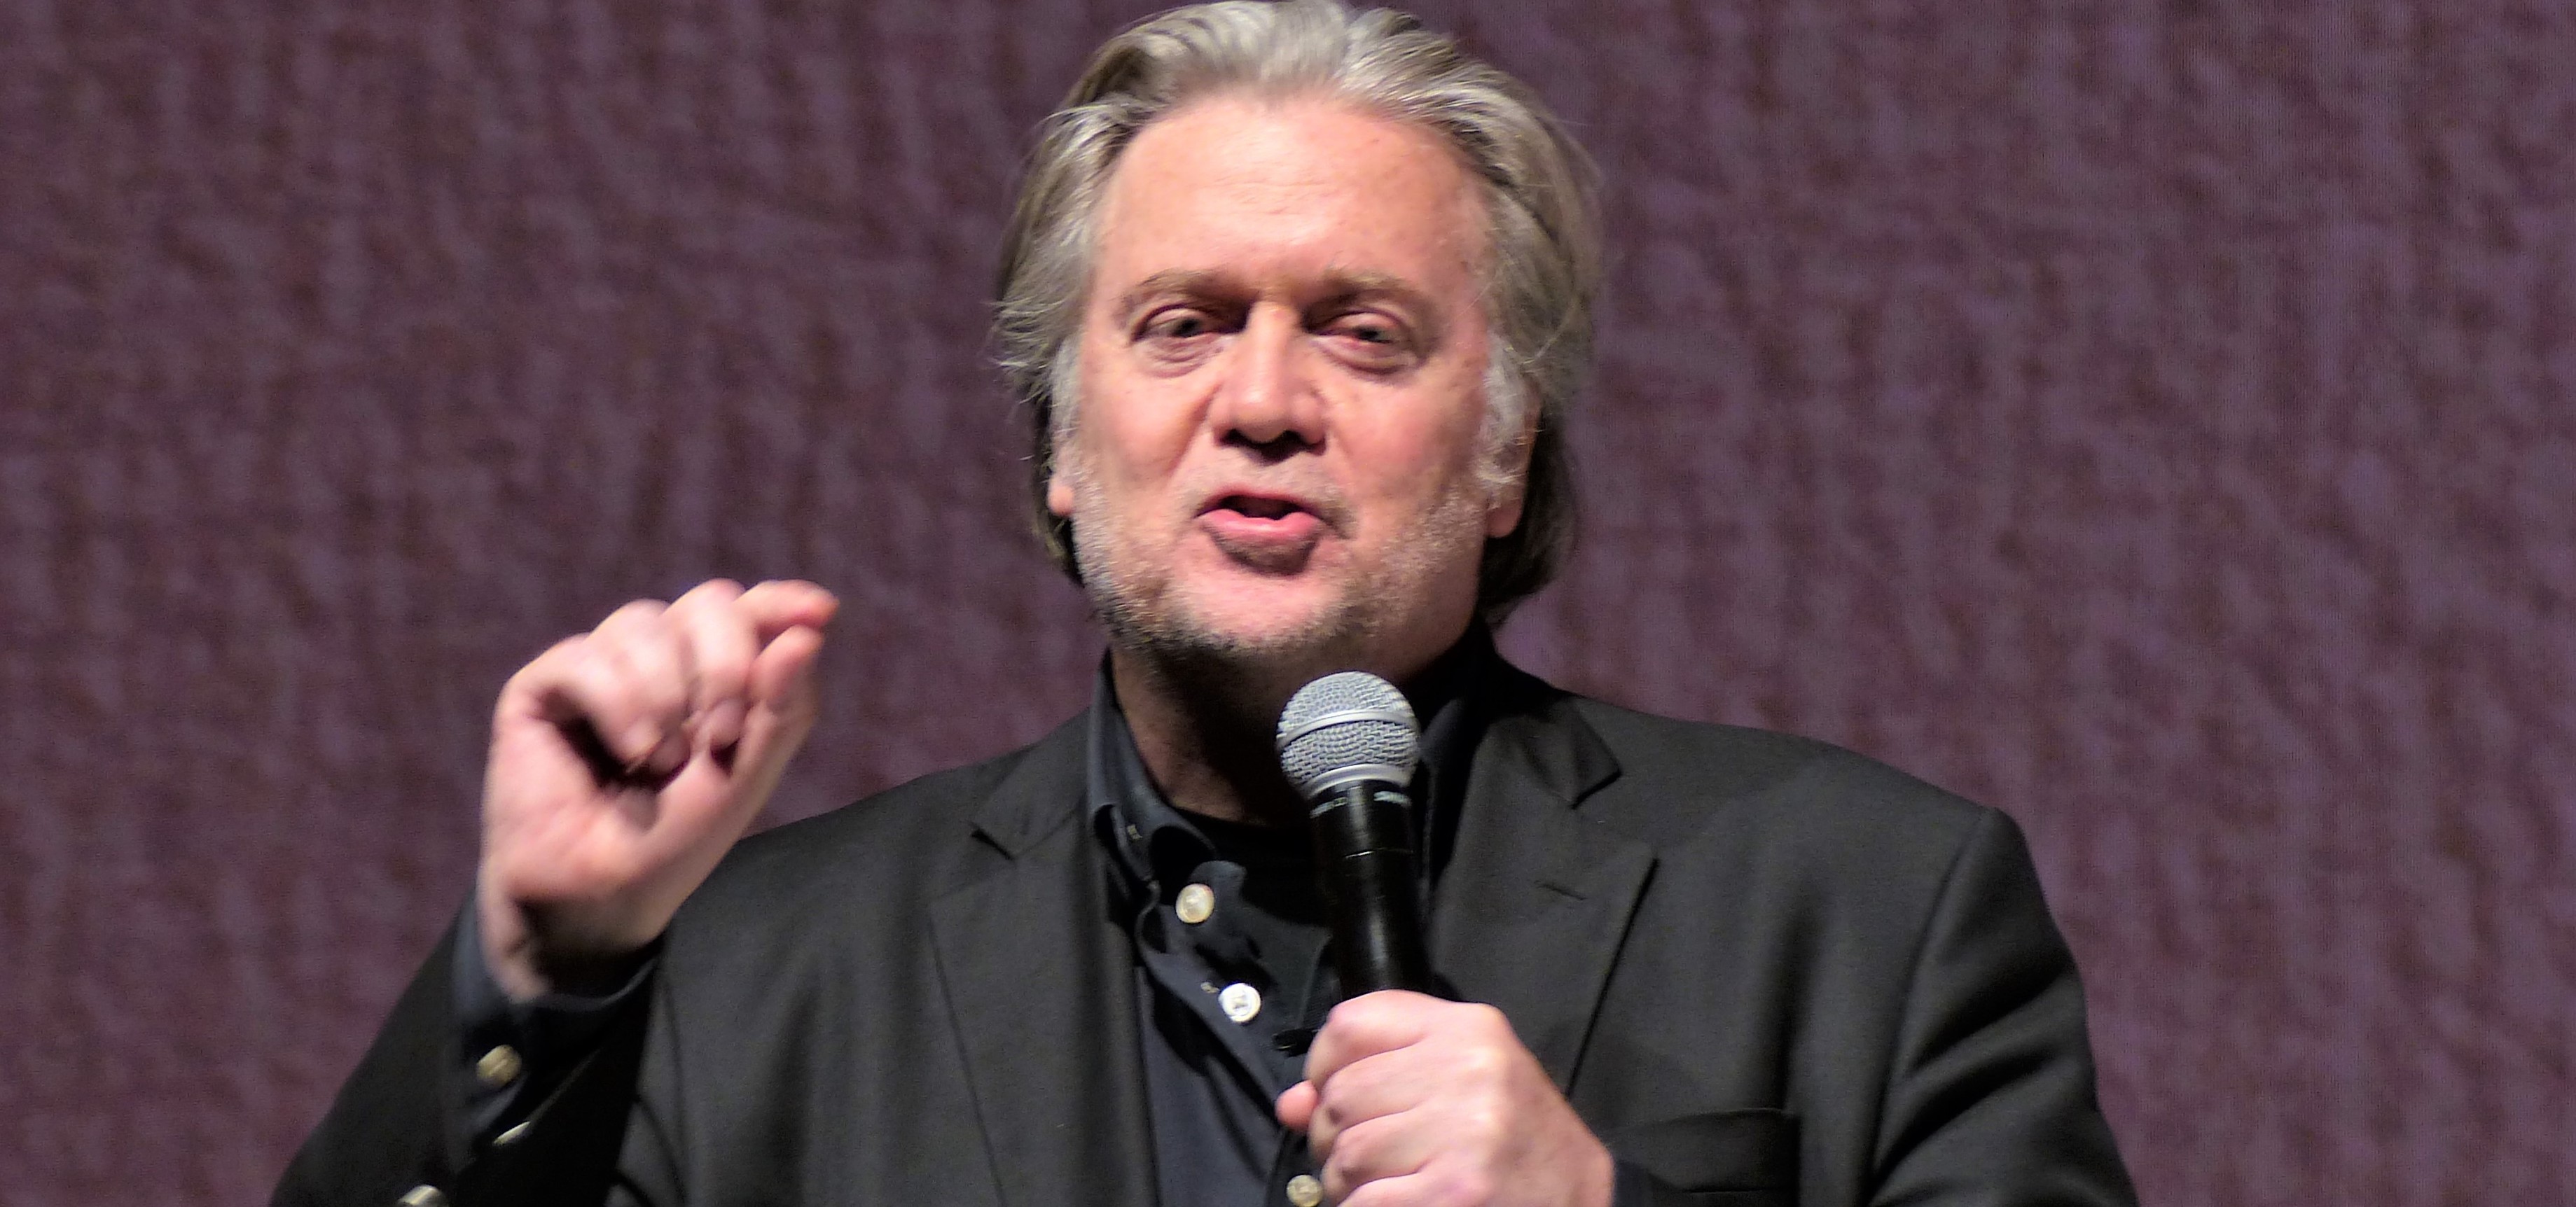 Steve Bannon indicted in border wall fraud scheme